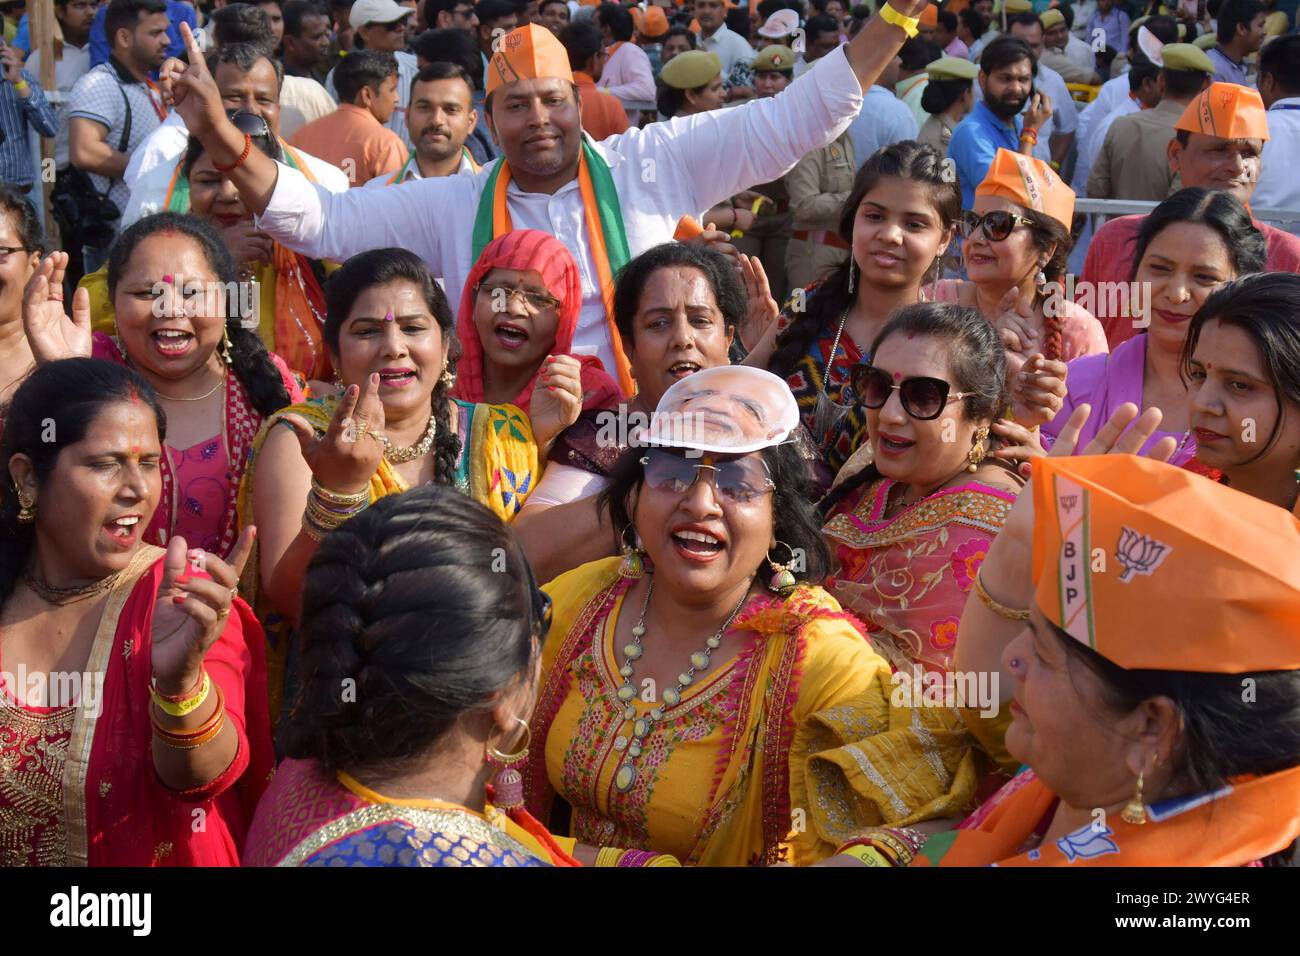 GHAZIABAD, INDIA - APRIL 6: Suuporters of BJP in the Prime Minister's road show on Ghaziabad Ambedkar Road, women workers dancing and singing on April 6, 2024 in Ghaziabad, India. Holding the party symbol 'lotus', PM Modi waved at the cheering crowd who greeted the four leaders with the slogans of 'Abki baar 400 paar' (400-plus seats for NDA this time), 'Har Har Modi' and 'Jai Shri Ram'. BJP first Lok Sabha election roadshow in Uttar Pradesh, canvassing support for the BJP's Ghaziabad candidate Atul Garg, who has been fielded in place of two-time MP and Union minister V K Singh. (Photo by Saki Stock Photo